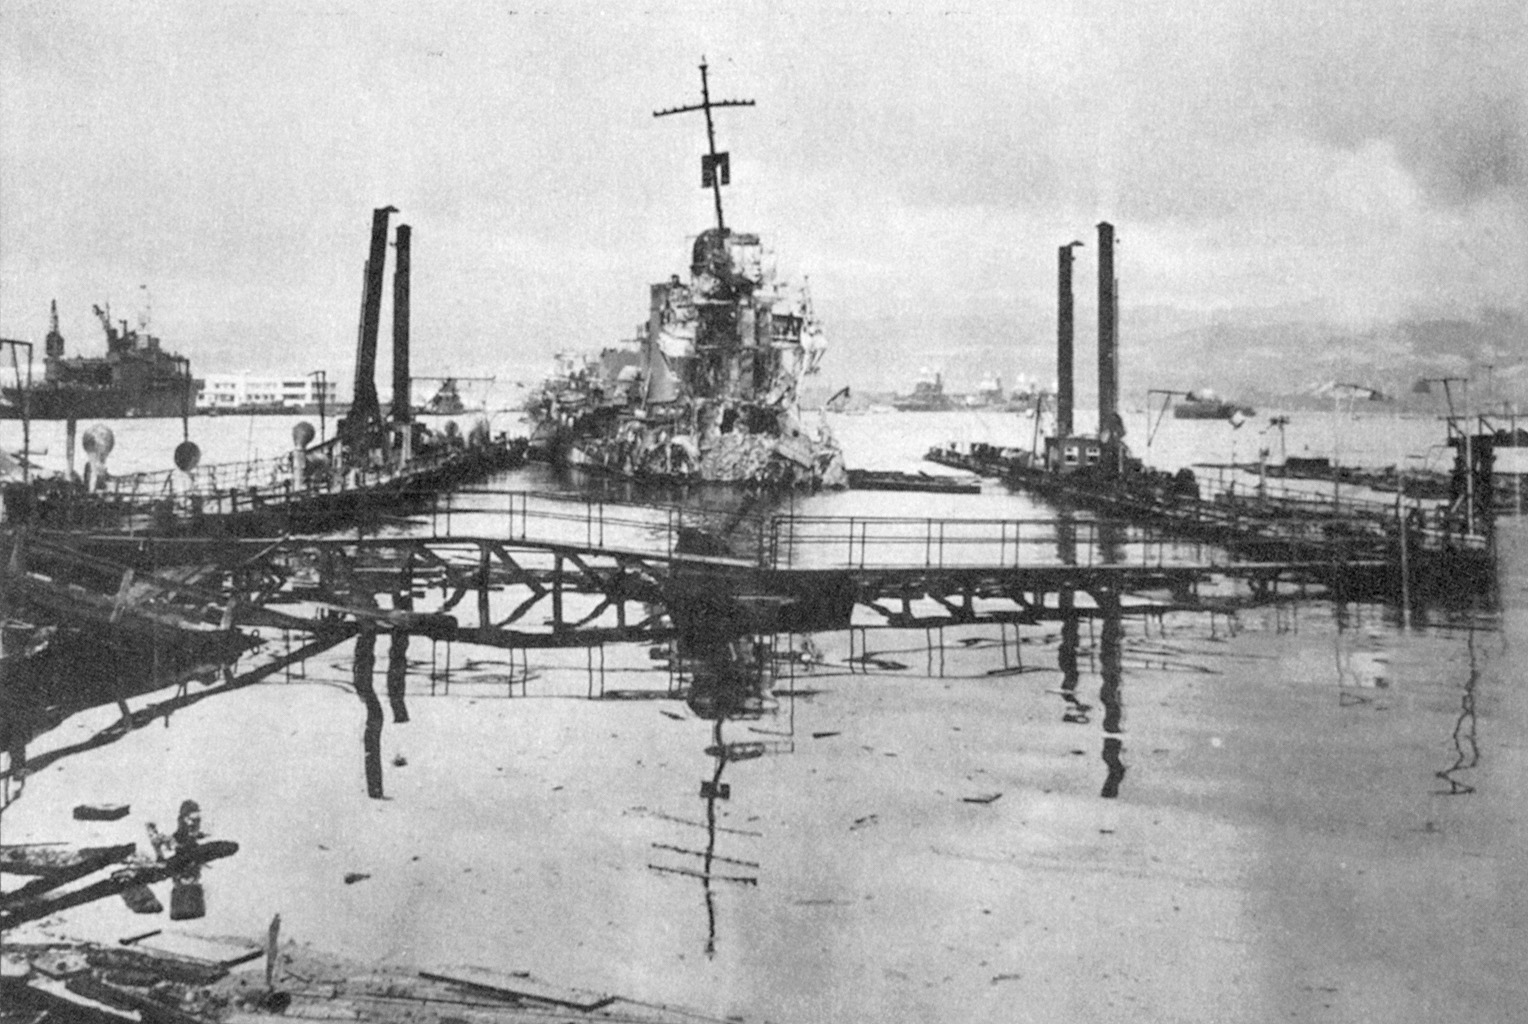 The heavily damaged destroyer Shaw floats in dry dock on December 8, 1941.